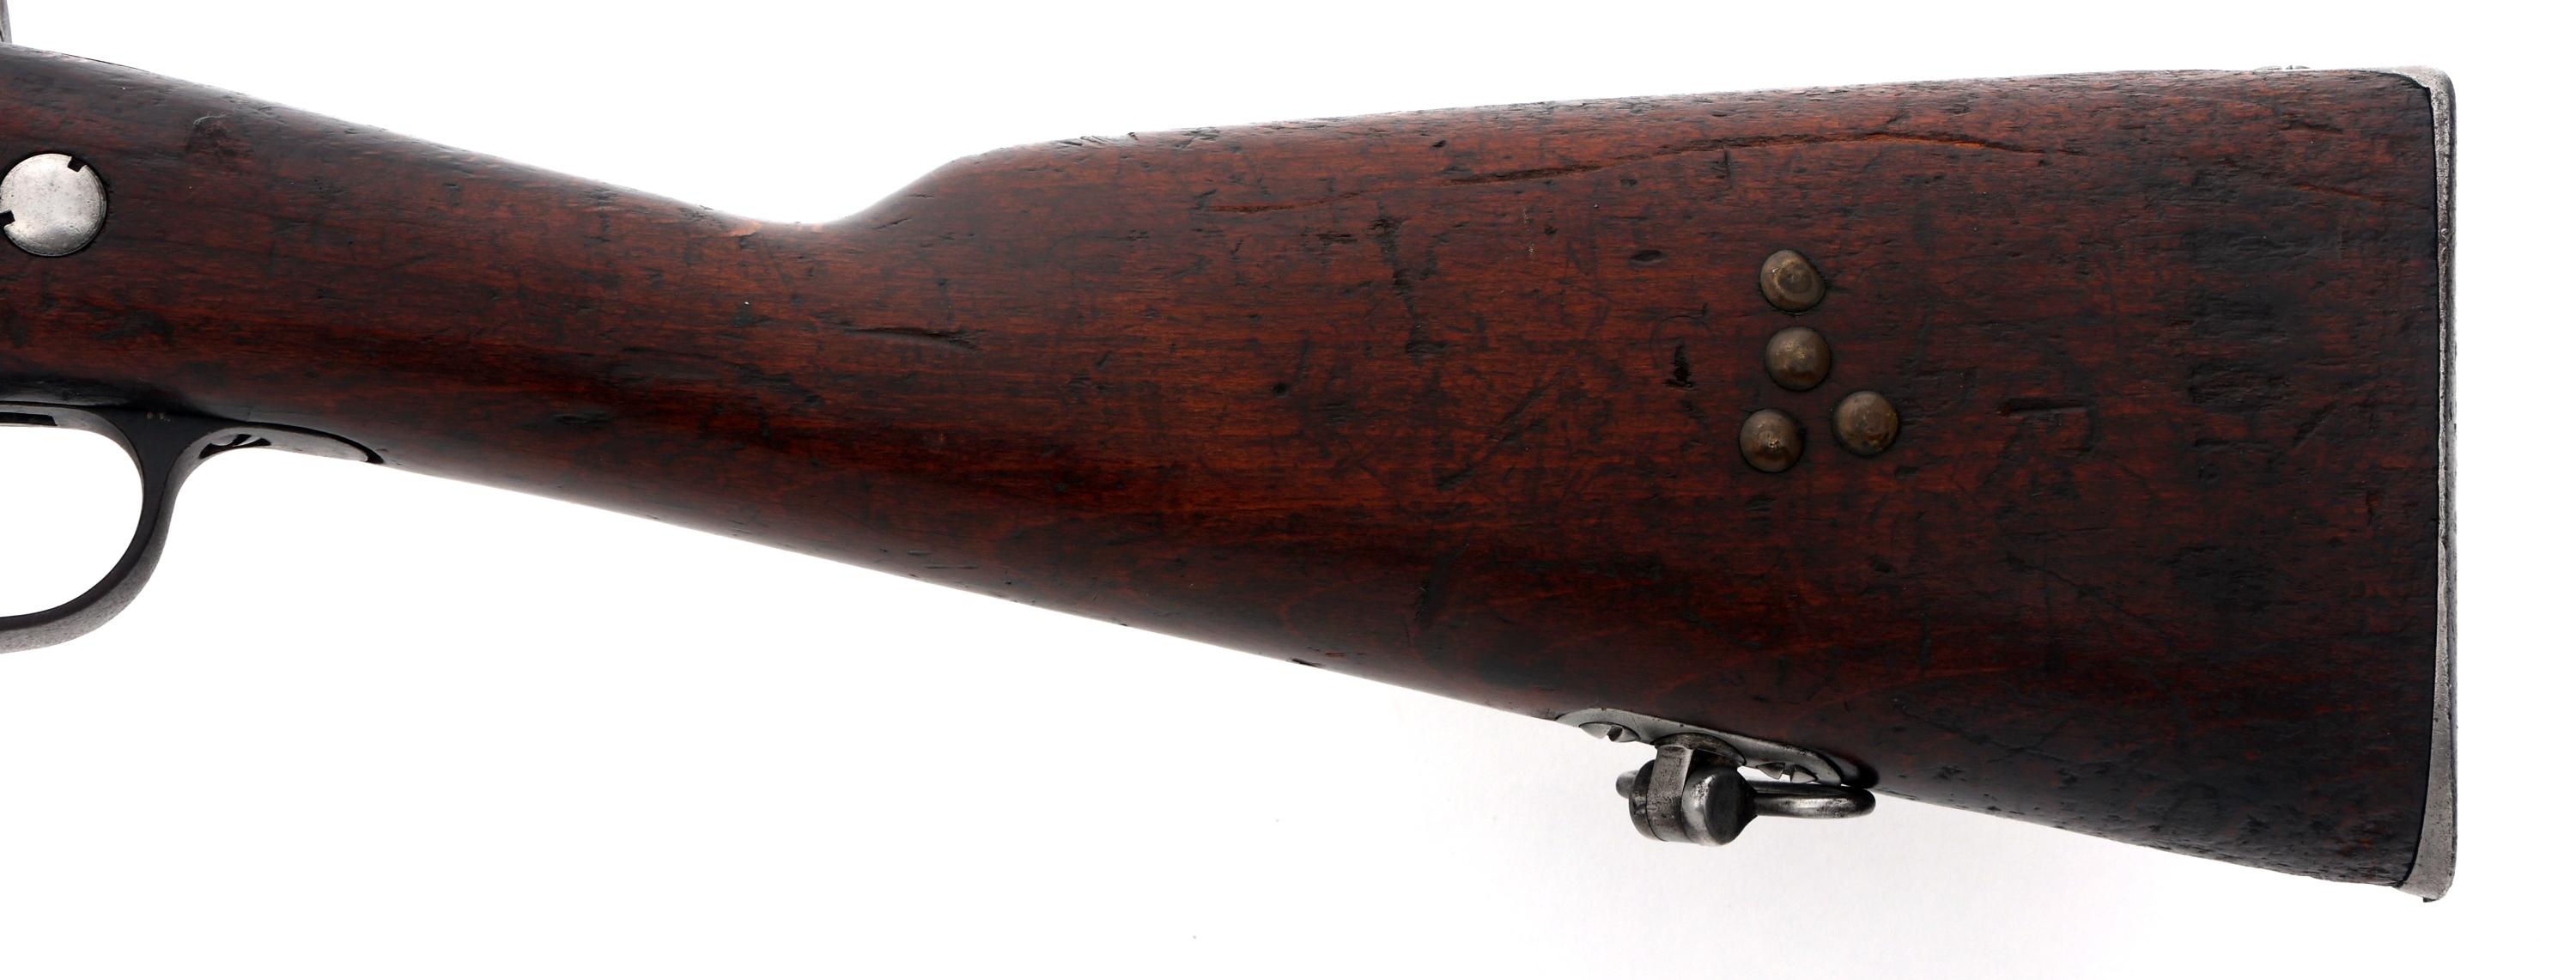 FRENCH ST ETIENNE MODEL 1907/15 8x50mm CAL RIFLE